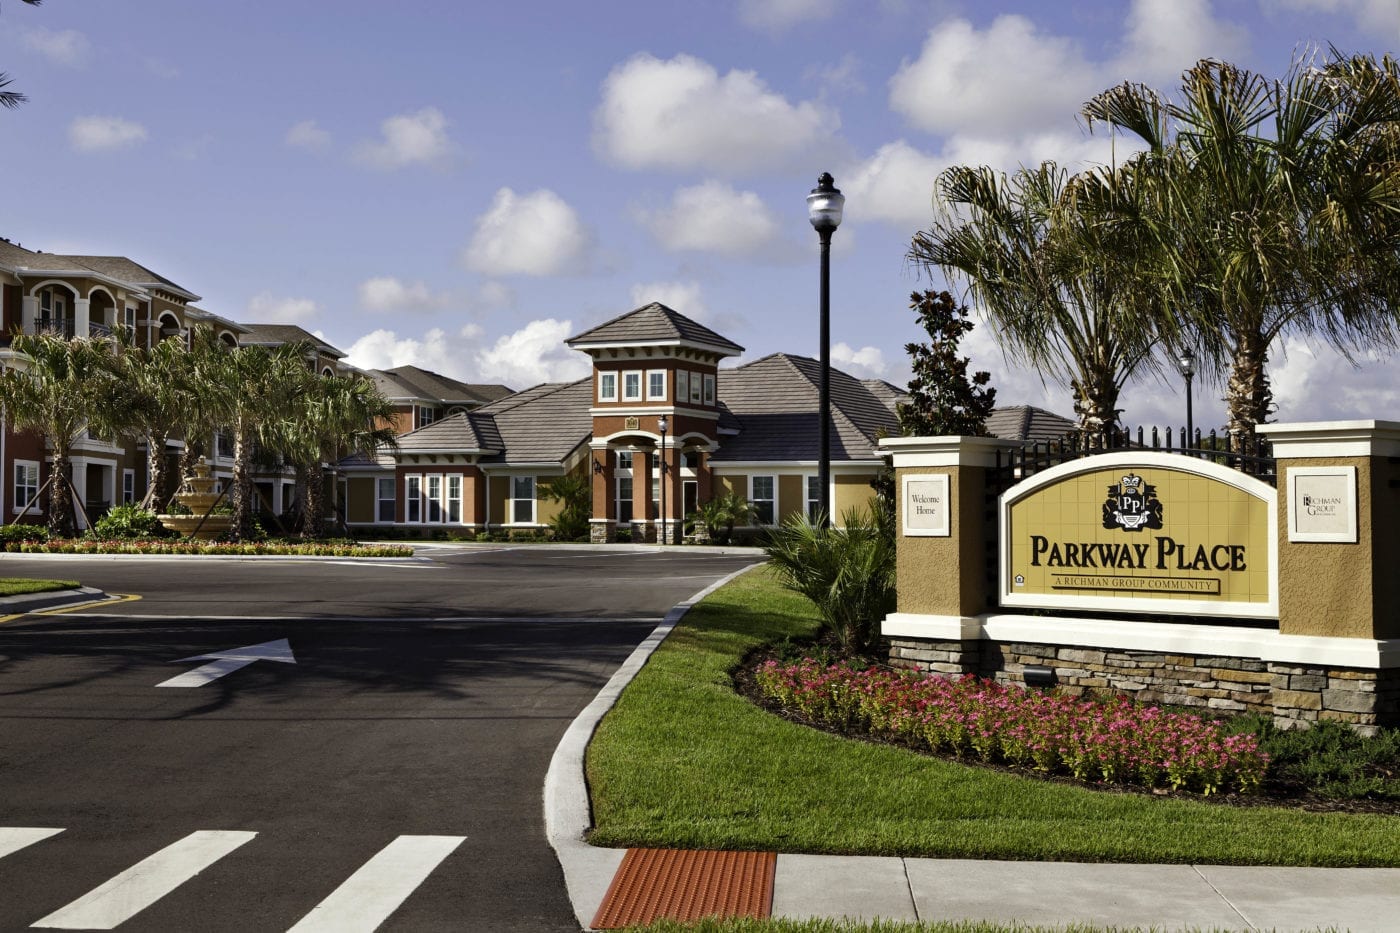 20010519_Pepple_Photography_Richman_Group_Melbourne_FL_Parkway_Place_MG_2174